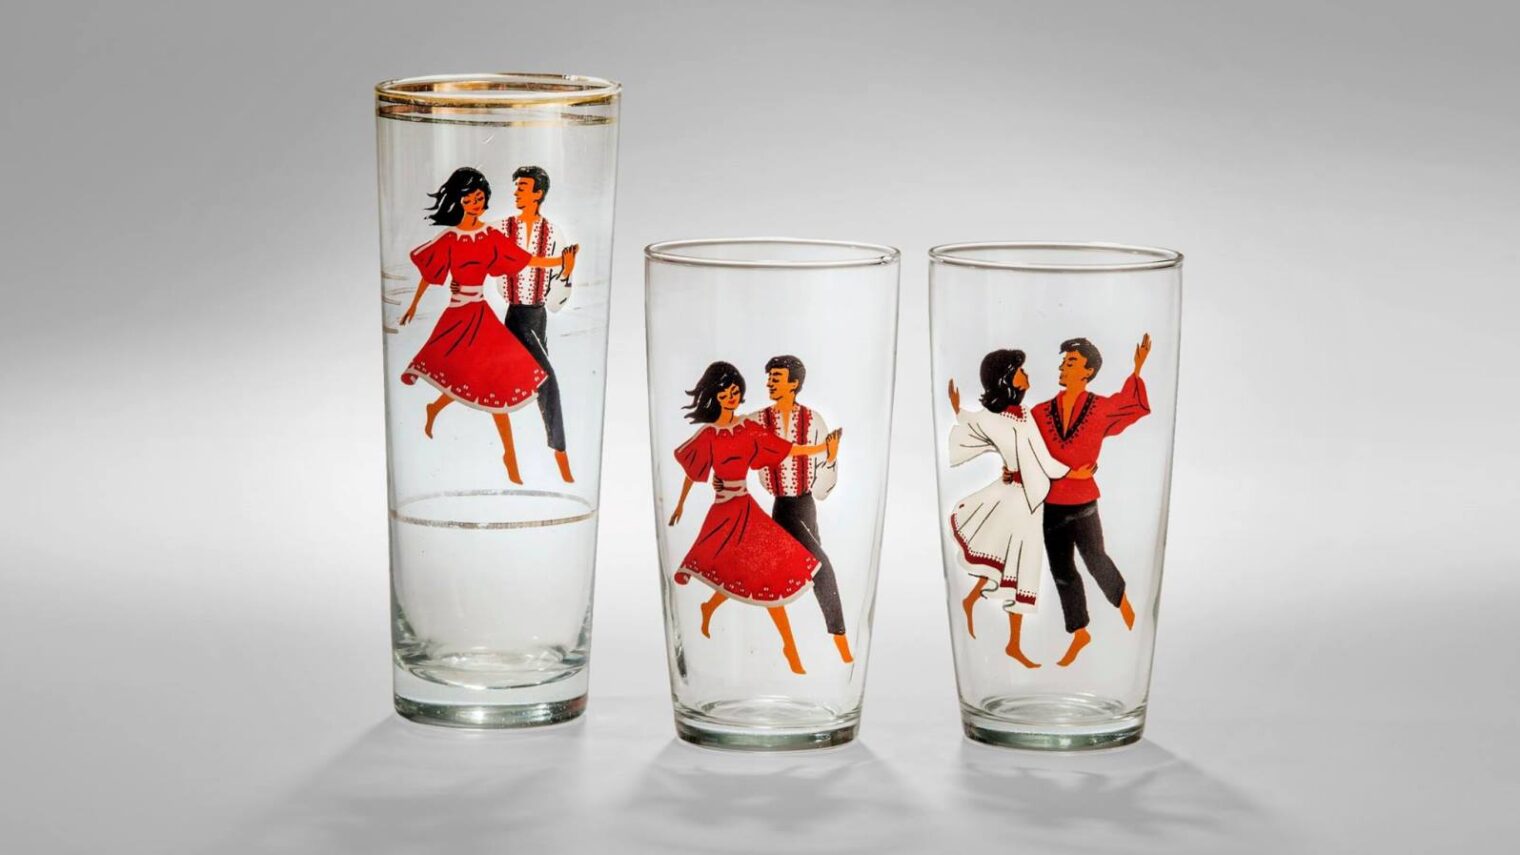 Glasses imprinted with images of Israeli dancers. Photo by Leonid Pedrol